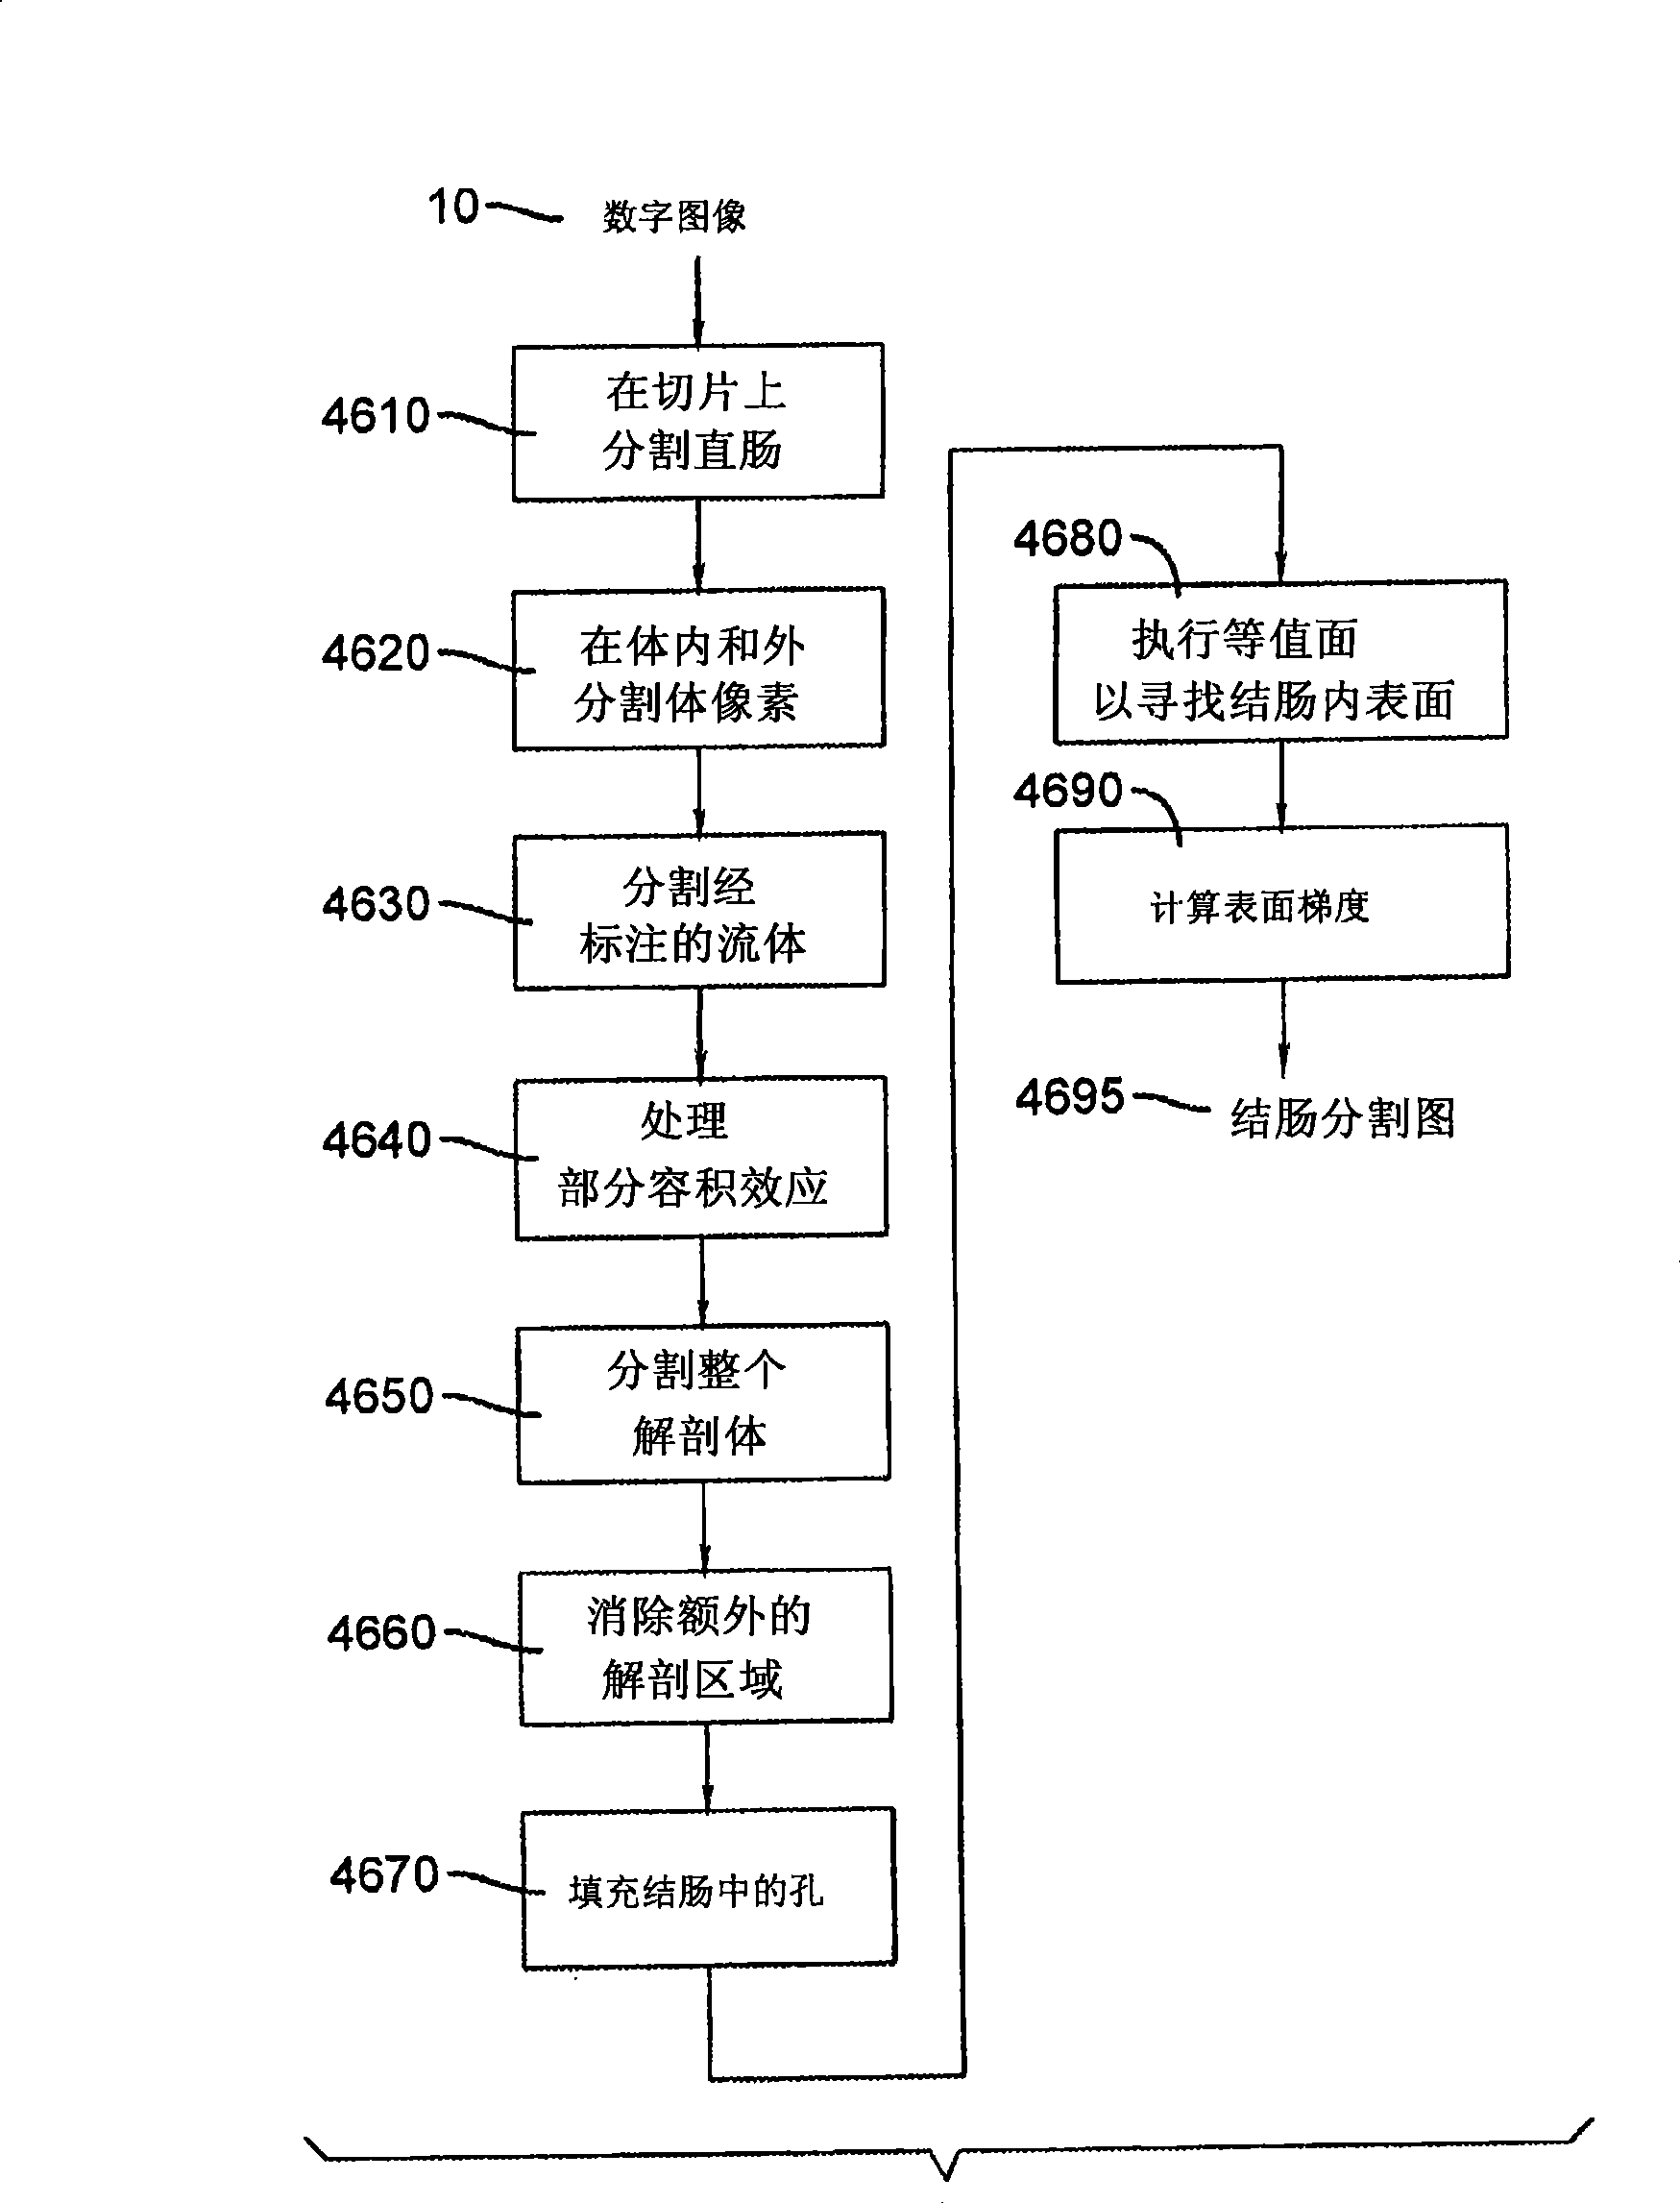 Cad detection system for multiple organ systems